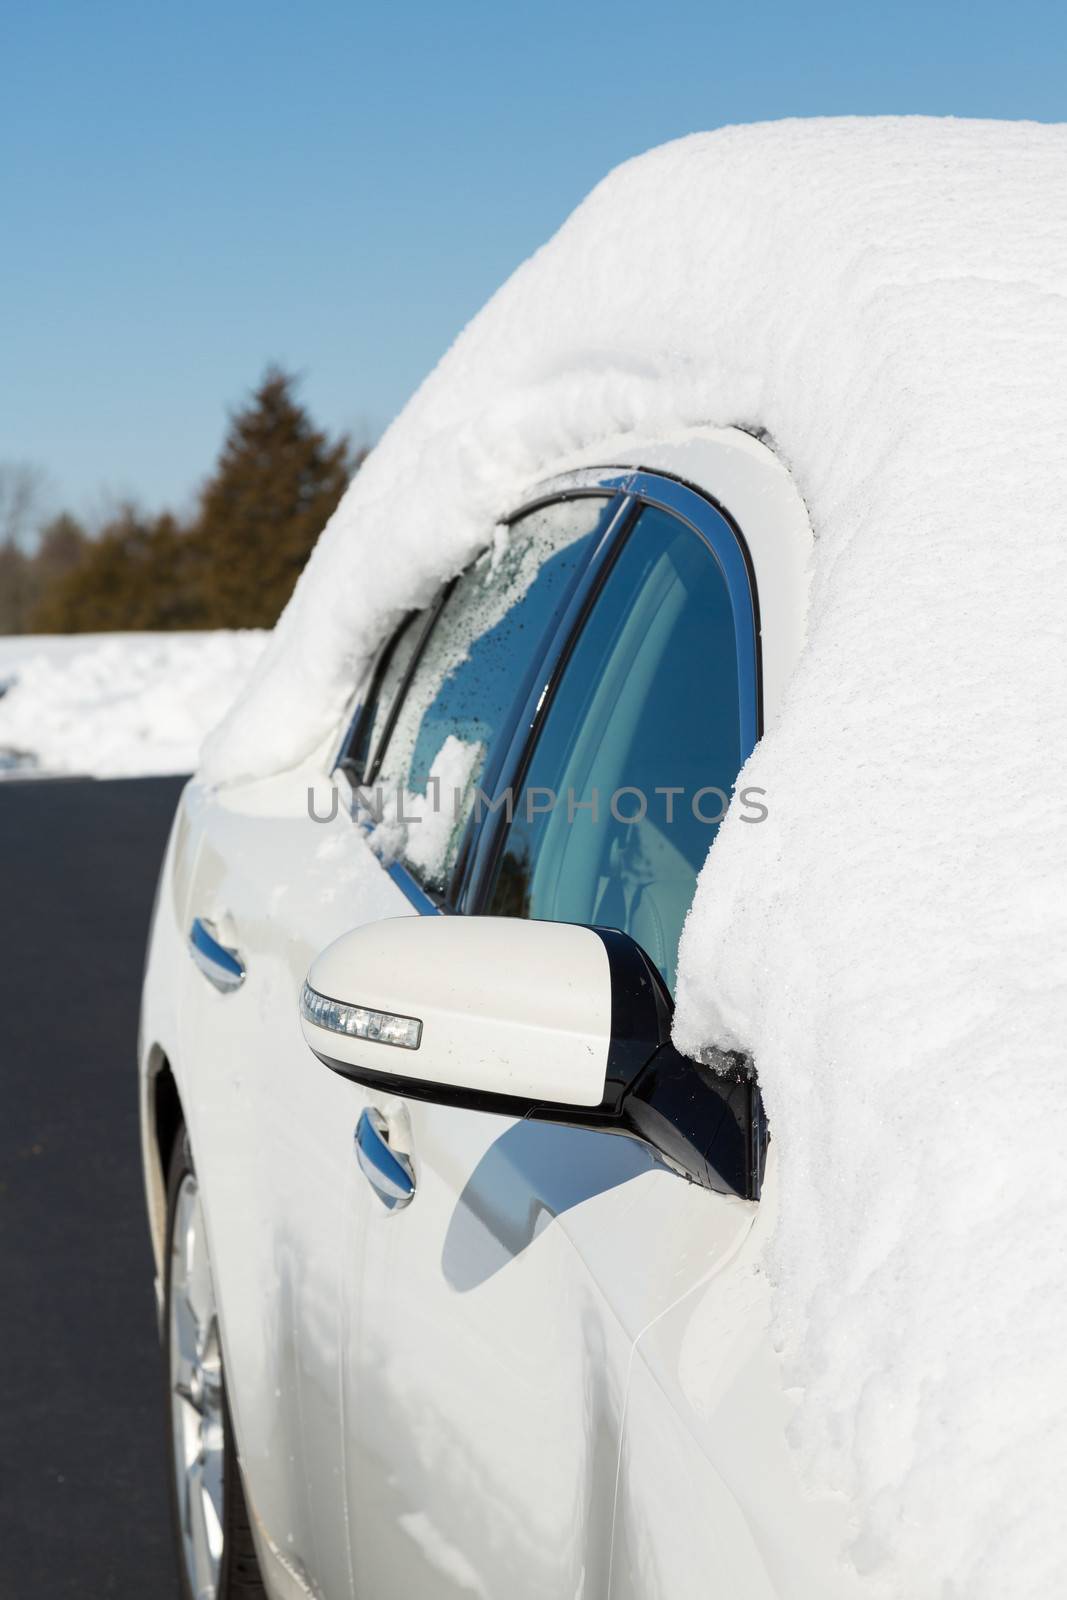 Deep snow piled high on top of white four door sedan car in rural setting with view down side of car and drive